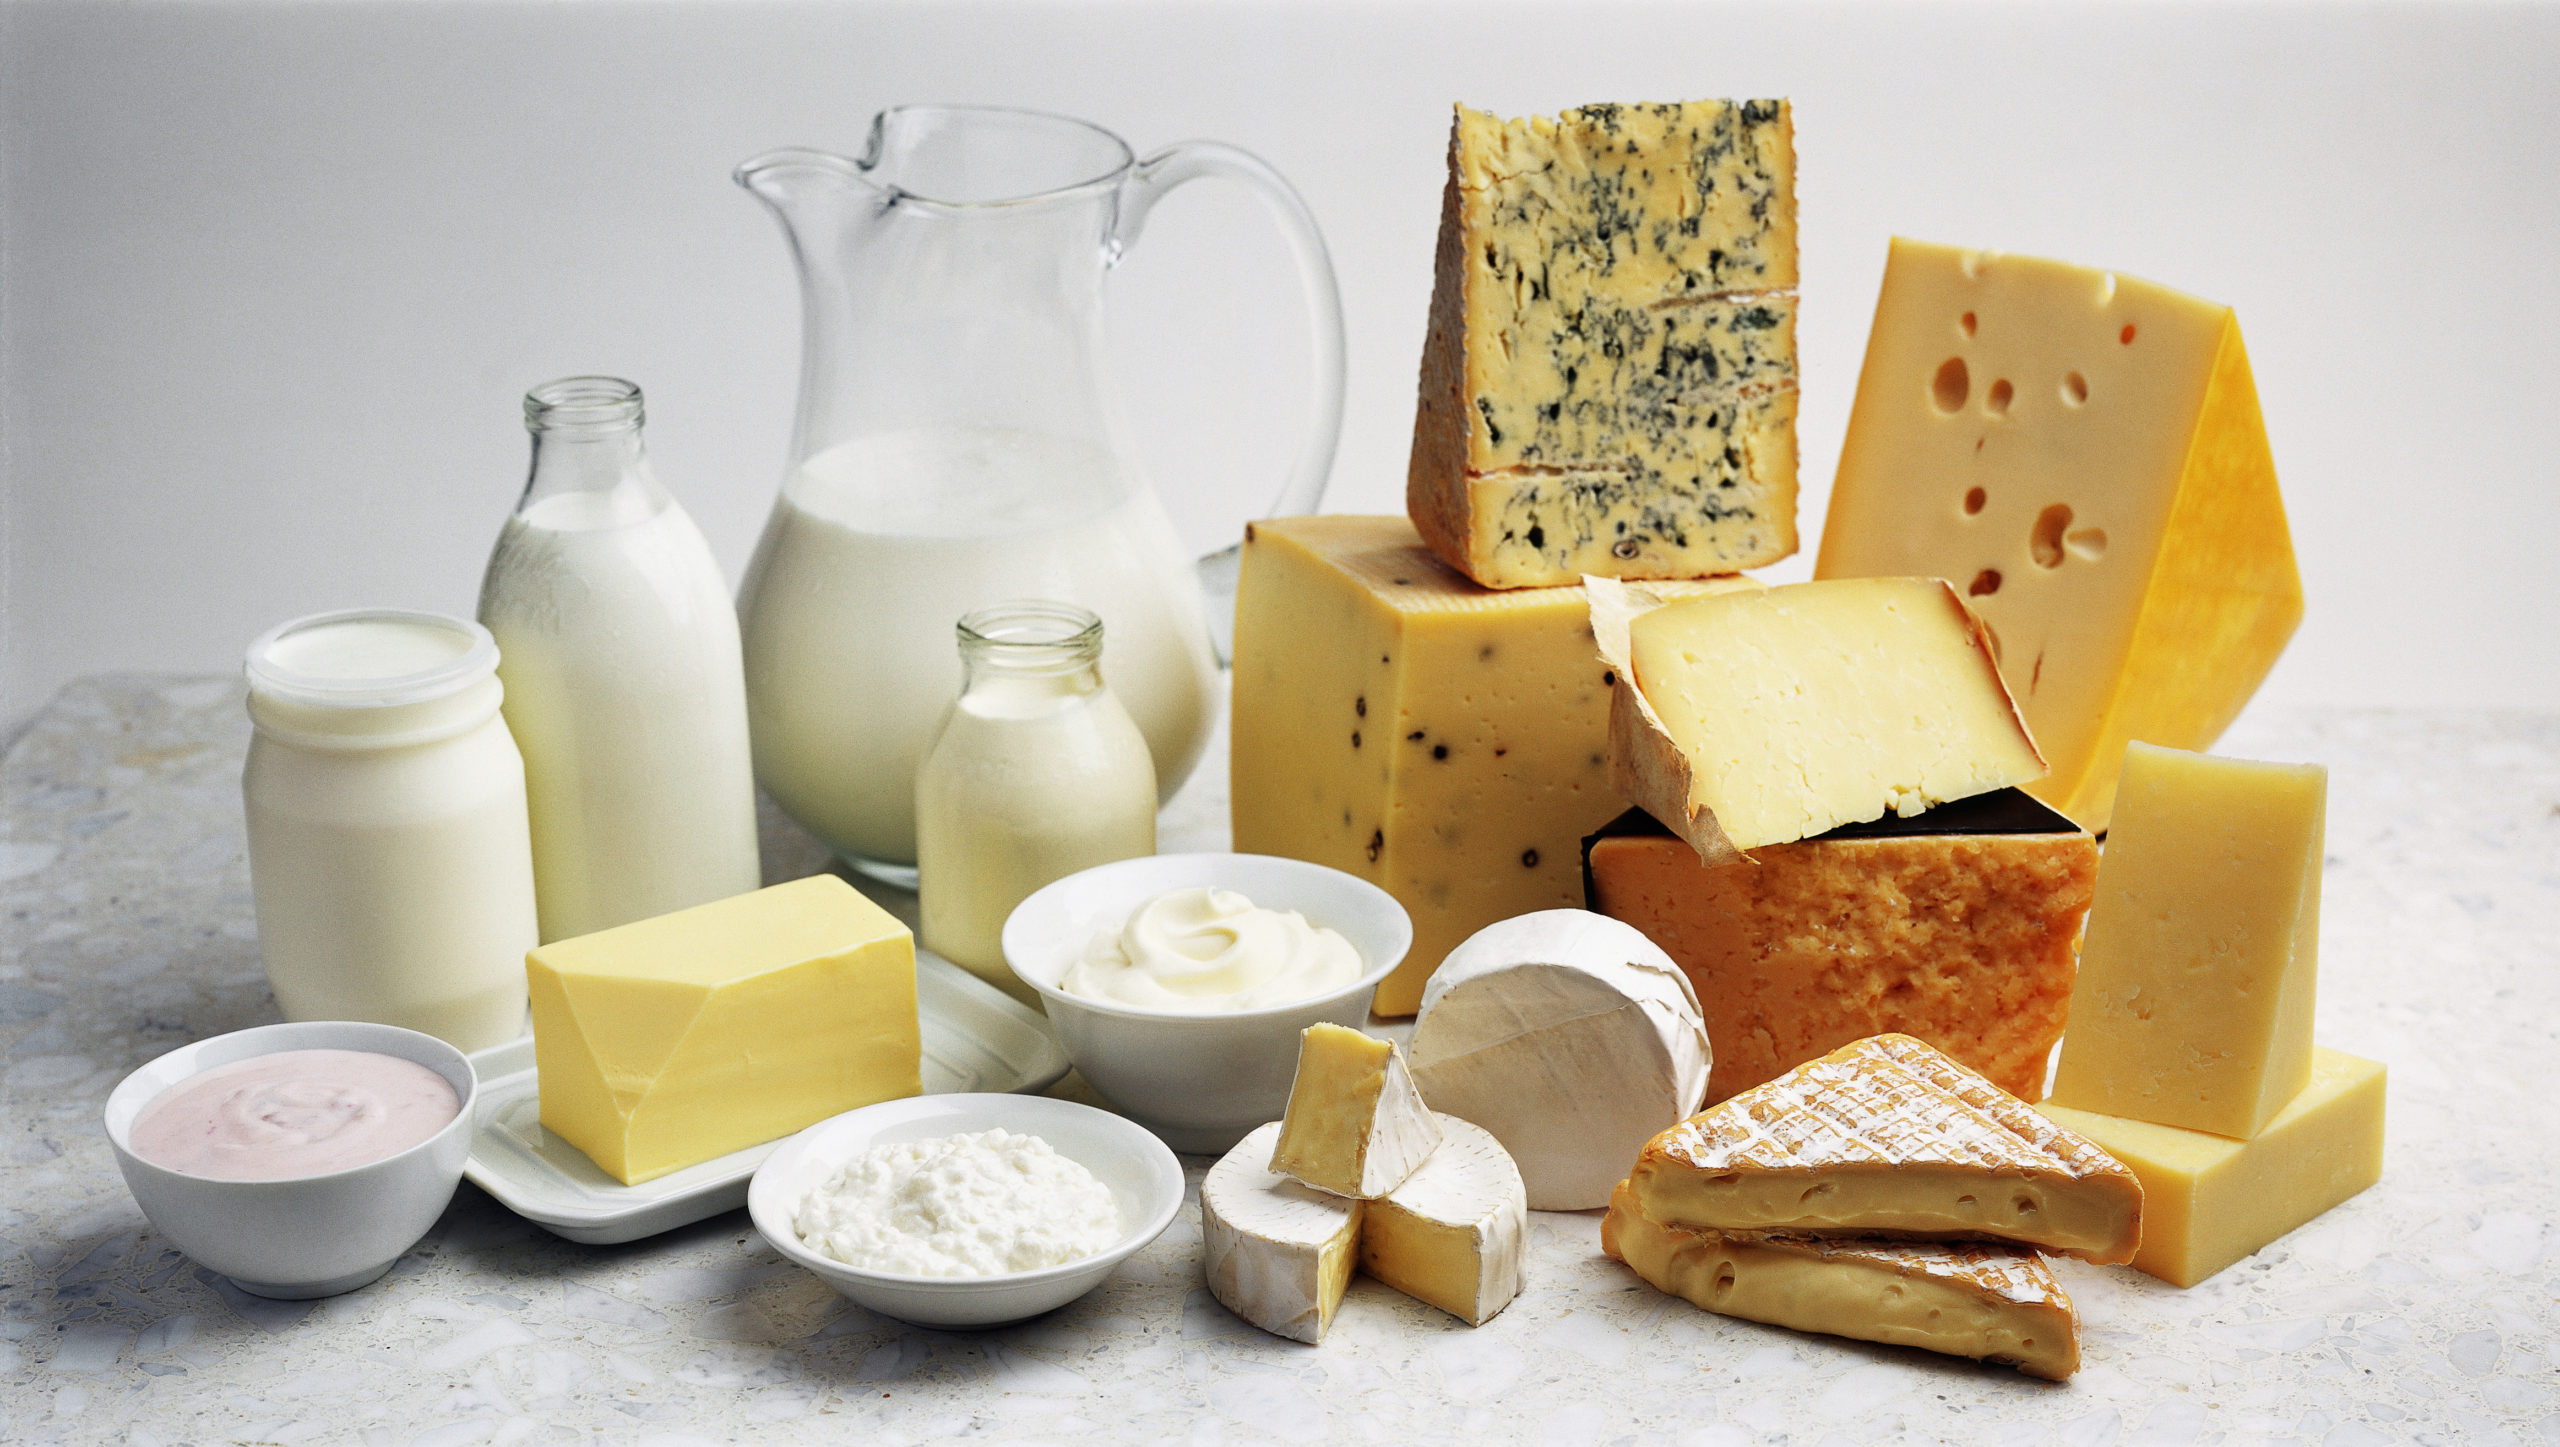 https://adpf.org.au/wp-content/uploads/2020/11/Dairy-products-scaled.jpg